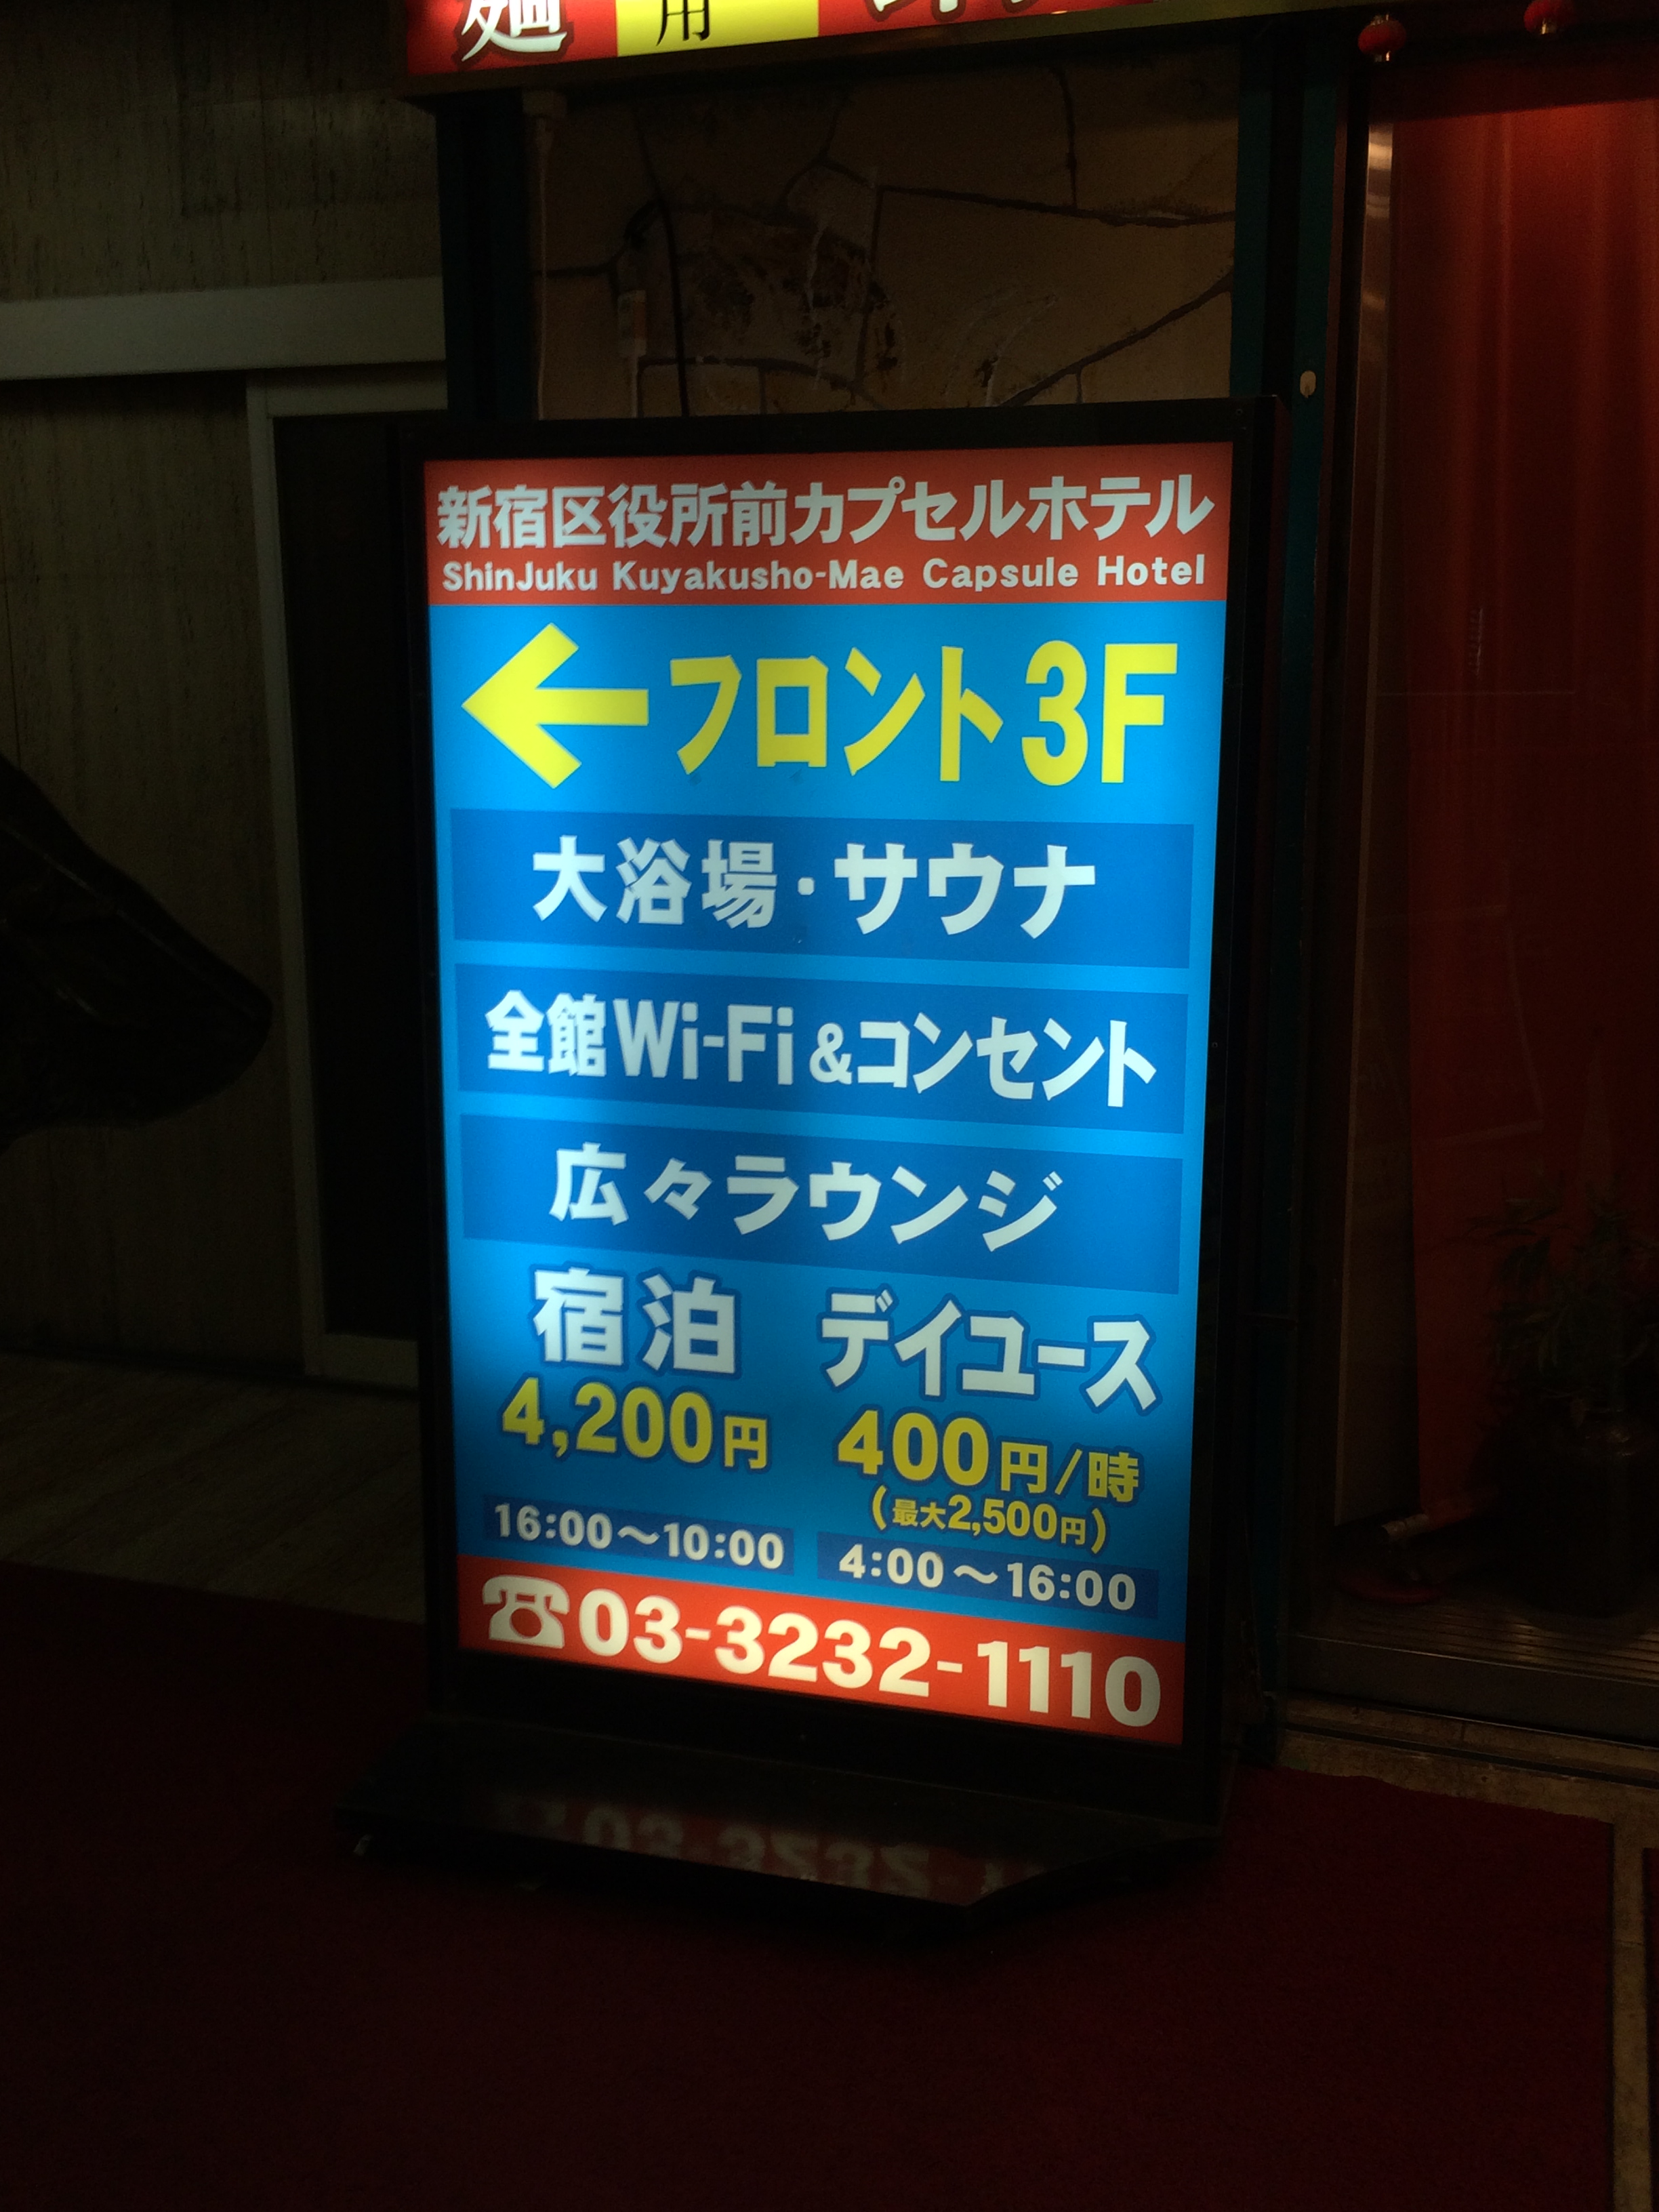 Sign for the capsule hotel